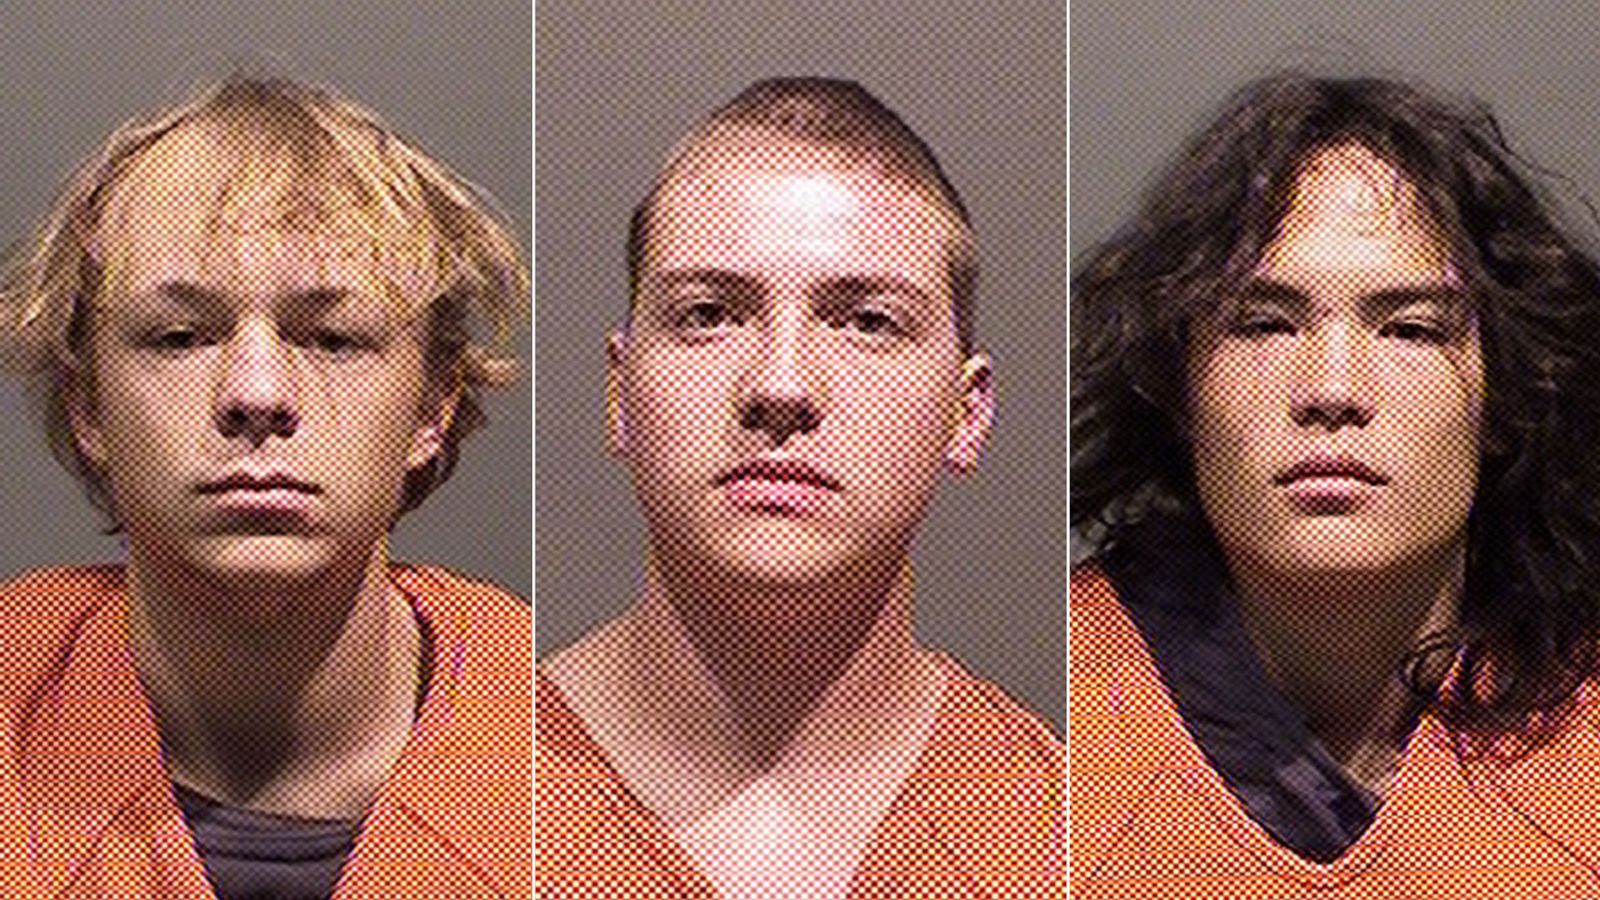 Three Colorado Teens Arrested For Fatal Rock-Throwing Incident